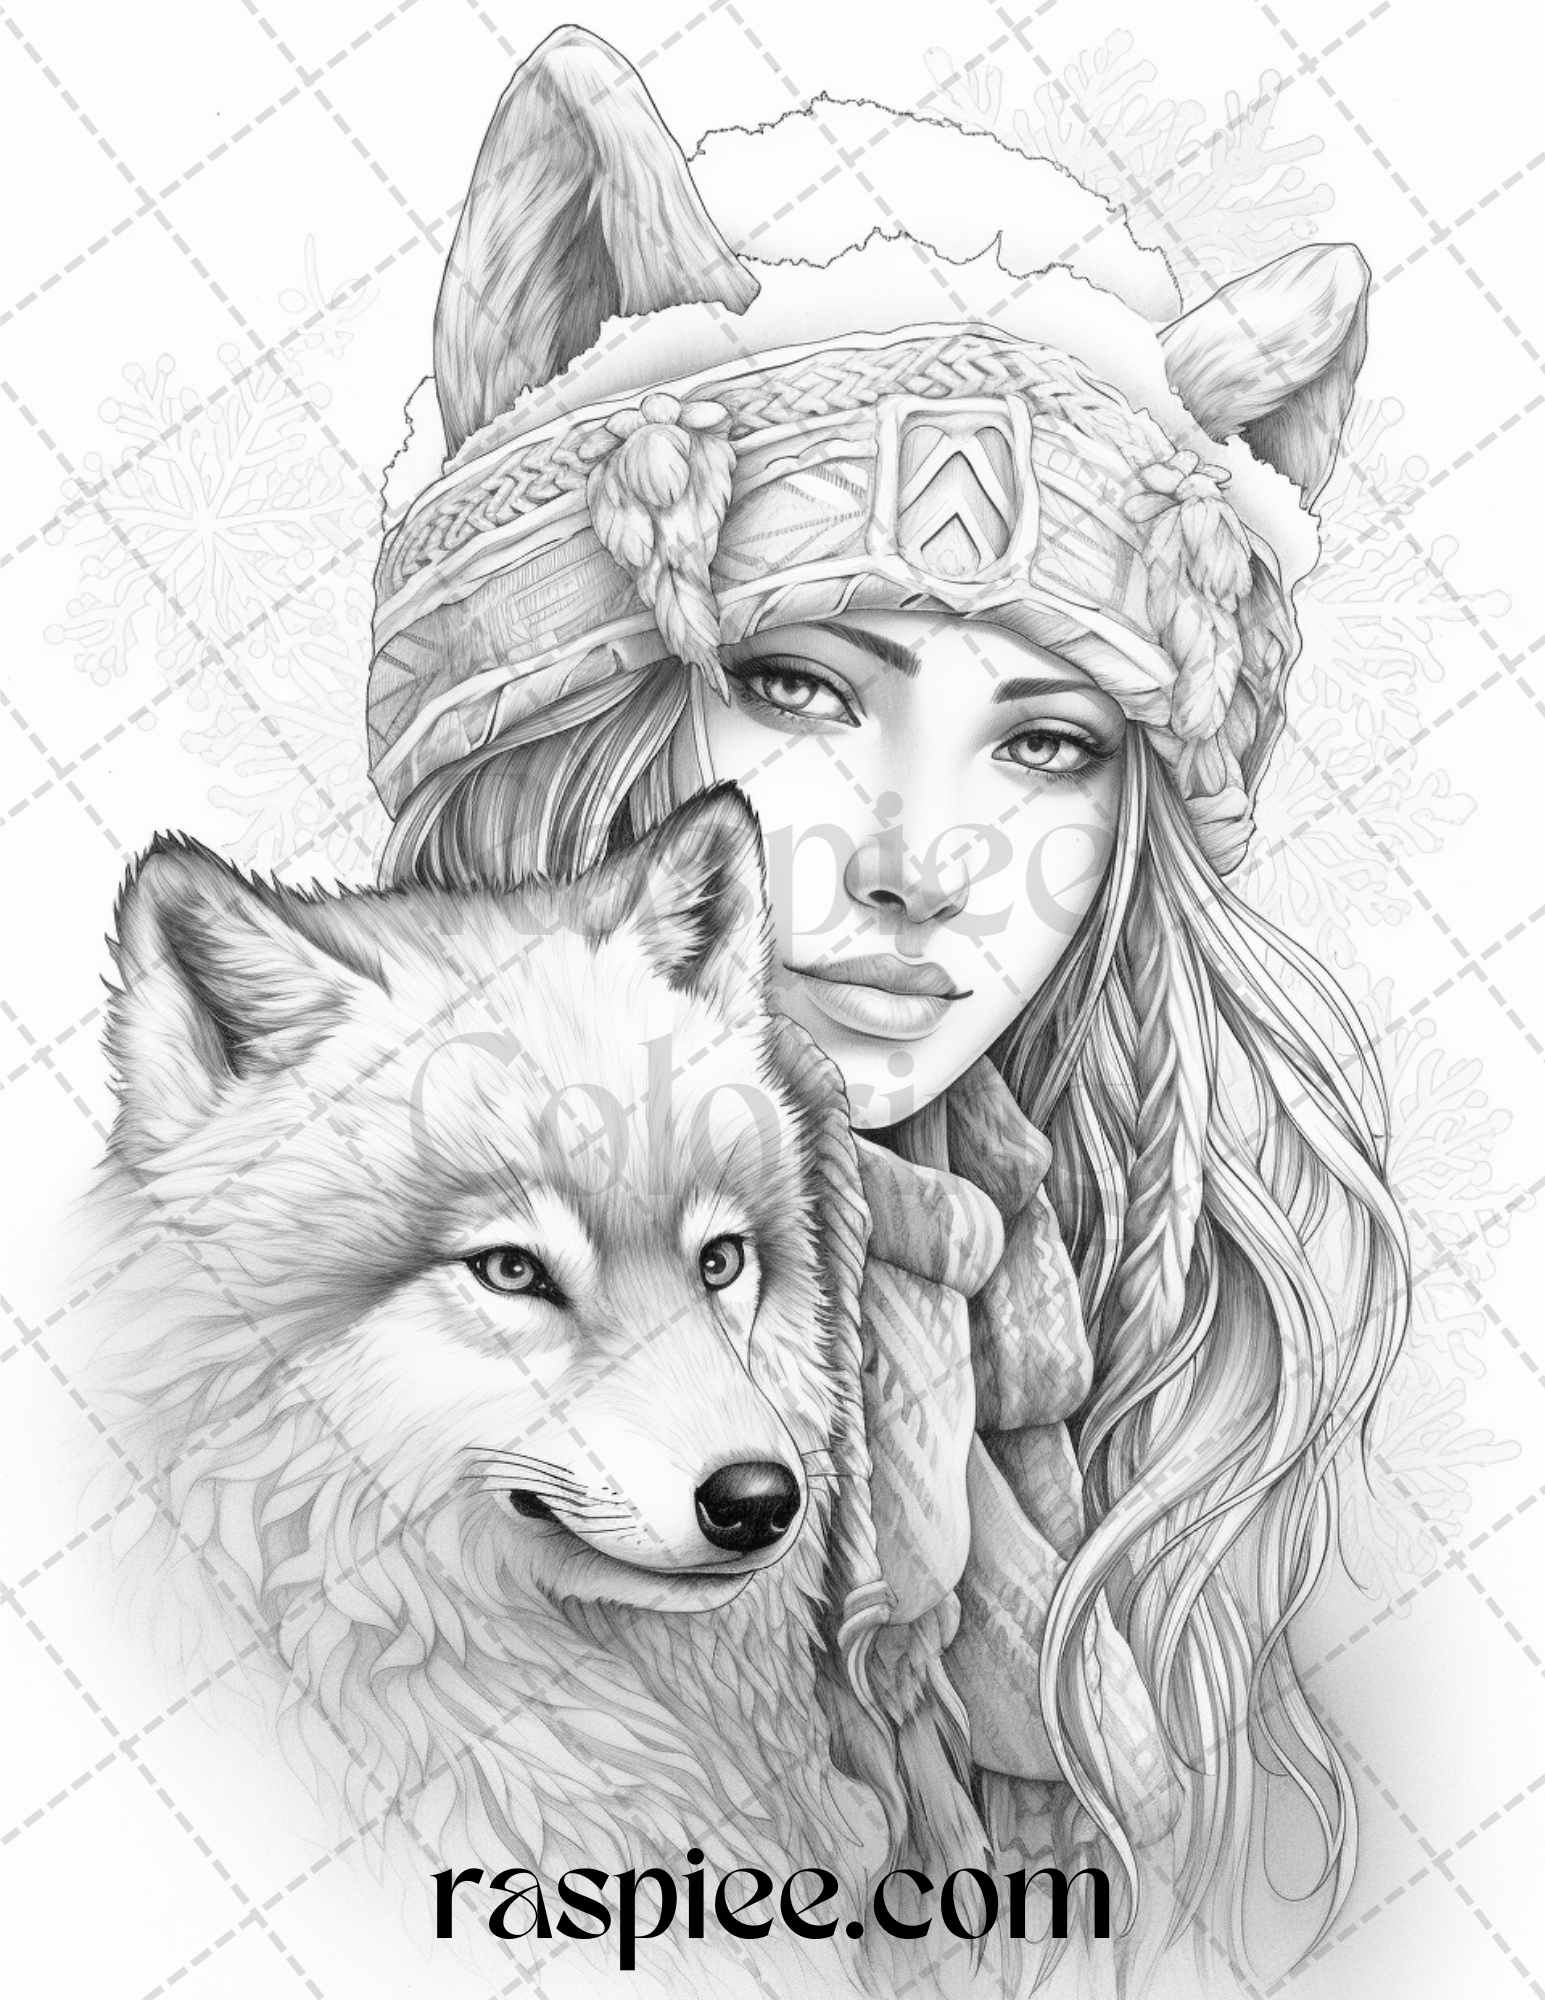 60 Beautiful Winter Girls Grayscale Coloring Pages Printable for Adults, PDF File Instant Download - raspiee